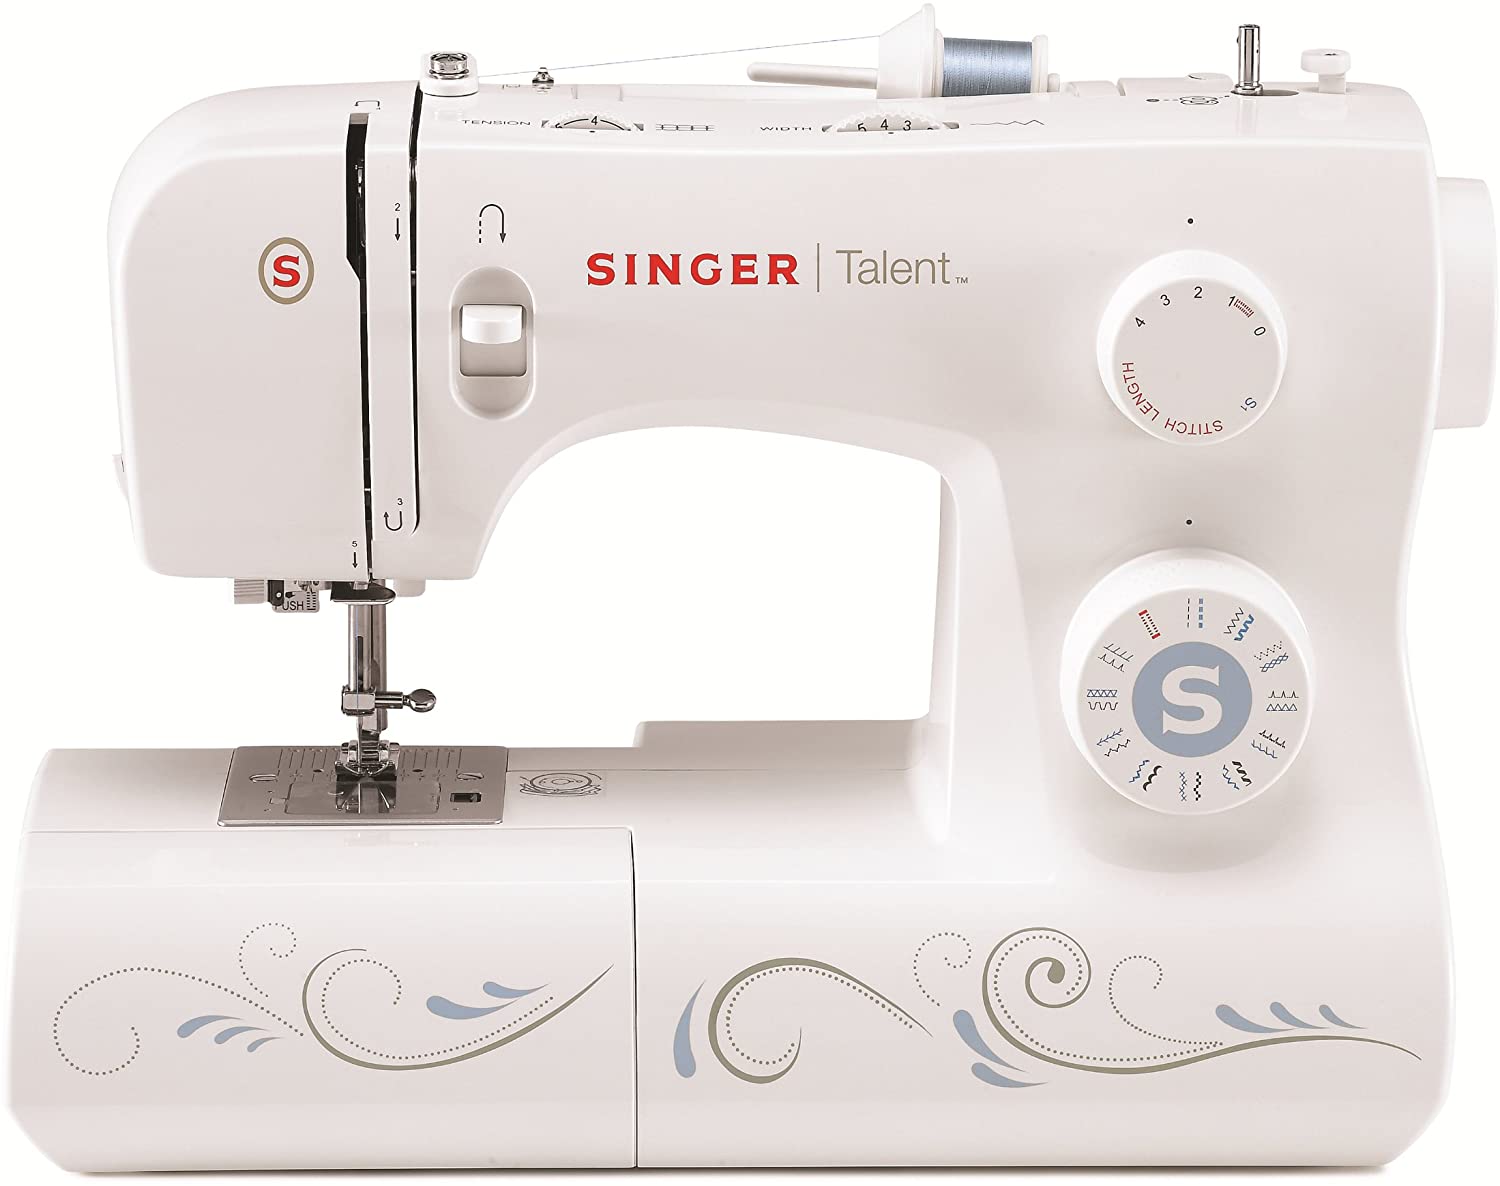 SINGER | Talent 3323 Portable Sewing Machine